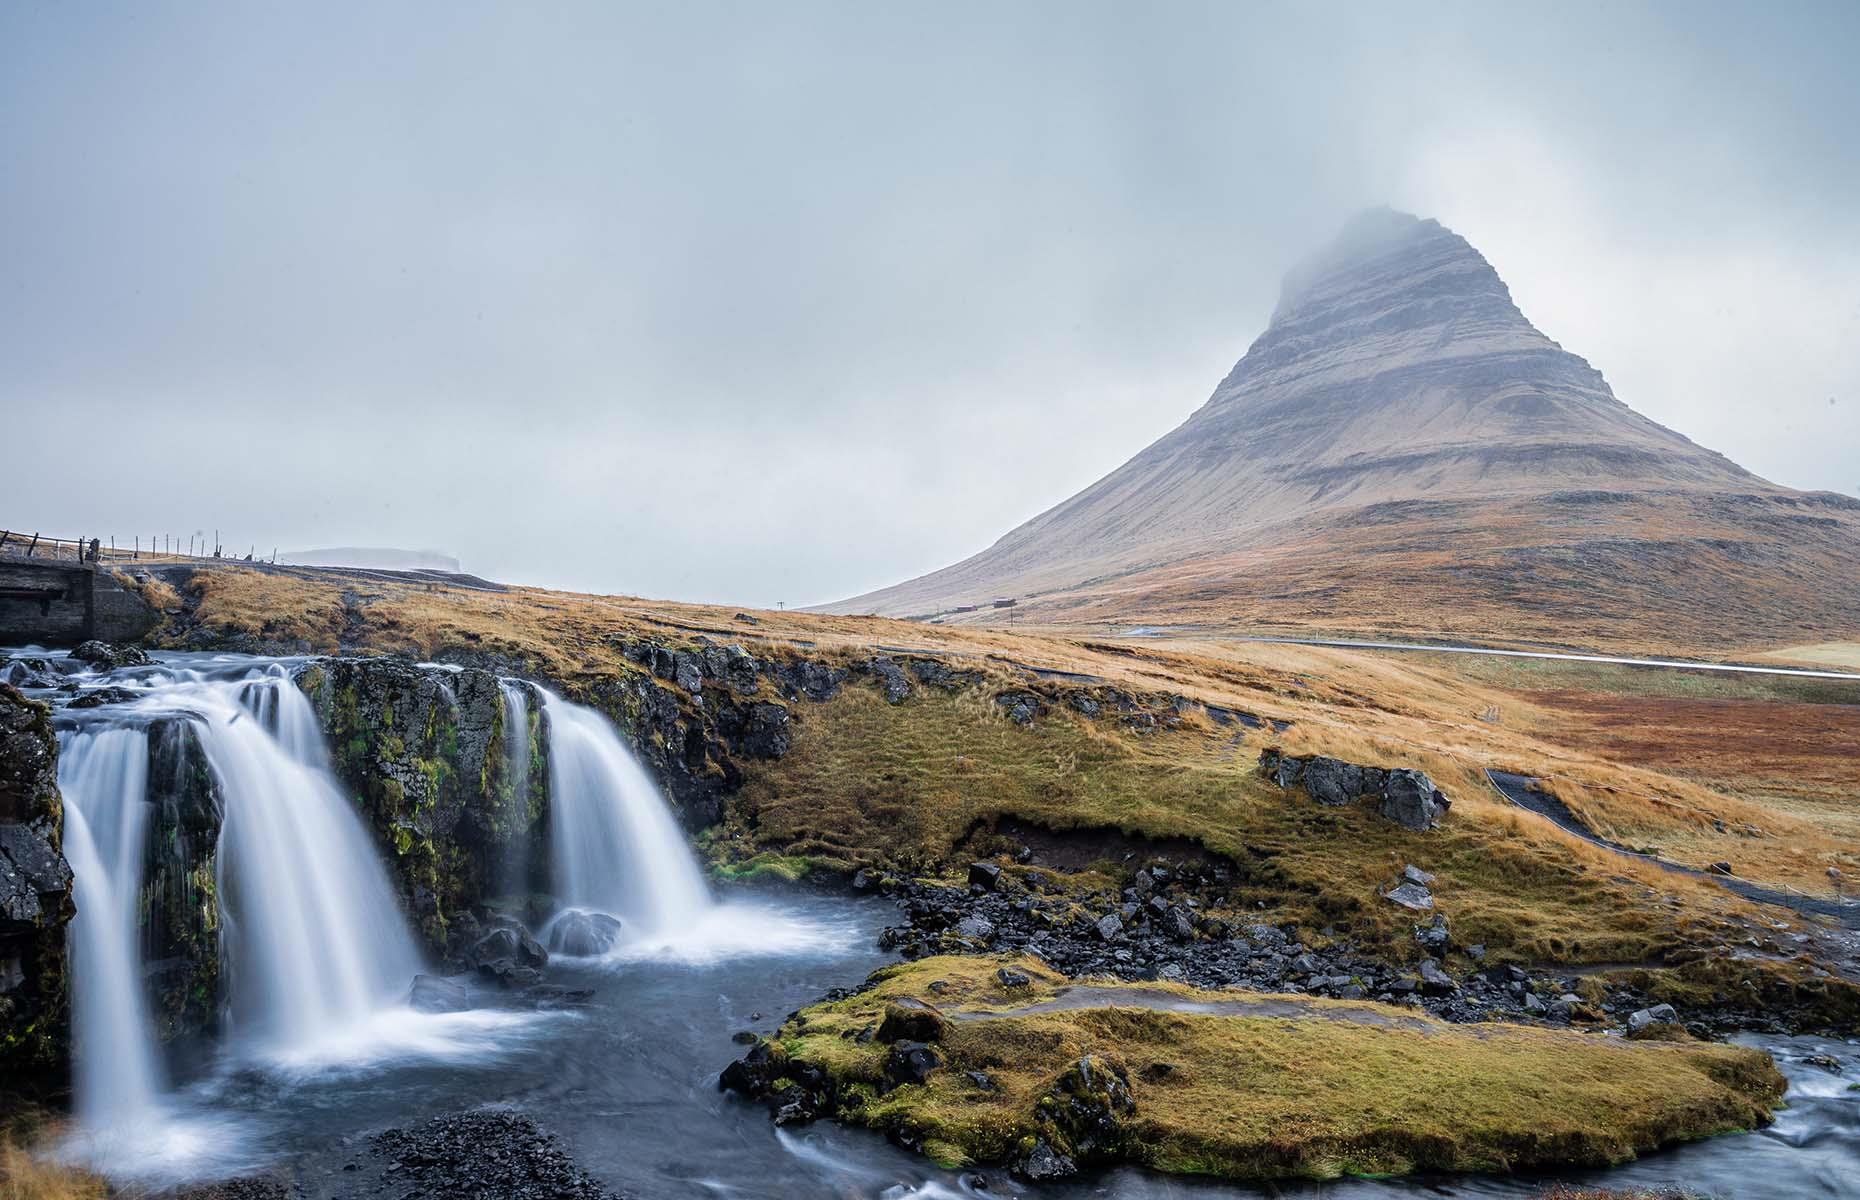 We've all heard of Everest and Fuji, and while these peaks are mesmerising in their own ways, Kirkjufell in Iceland is altogether more ethereal. The 1,519-foot (463m) mountain can be found on the island's western coastline, an area defined by crystalline fjords, geothermal pools and dynamic waterfalls. It's the most photographed peak in all of Iceland.